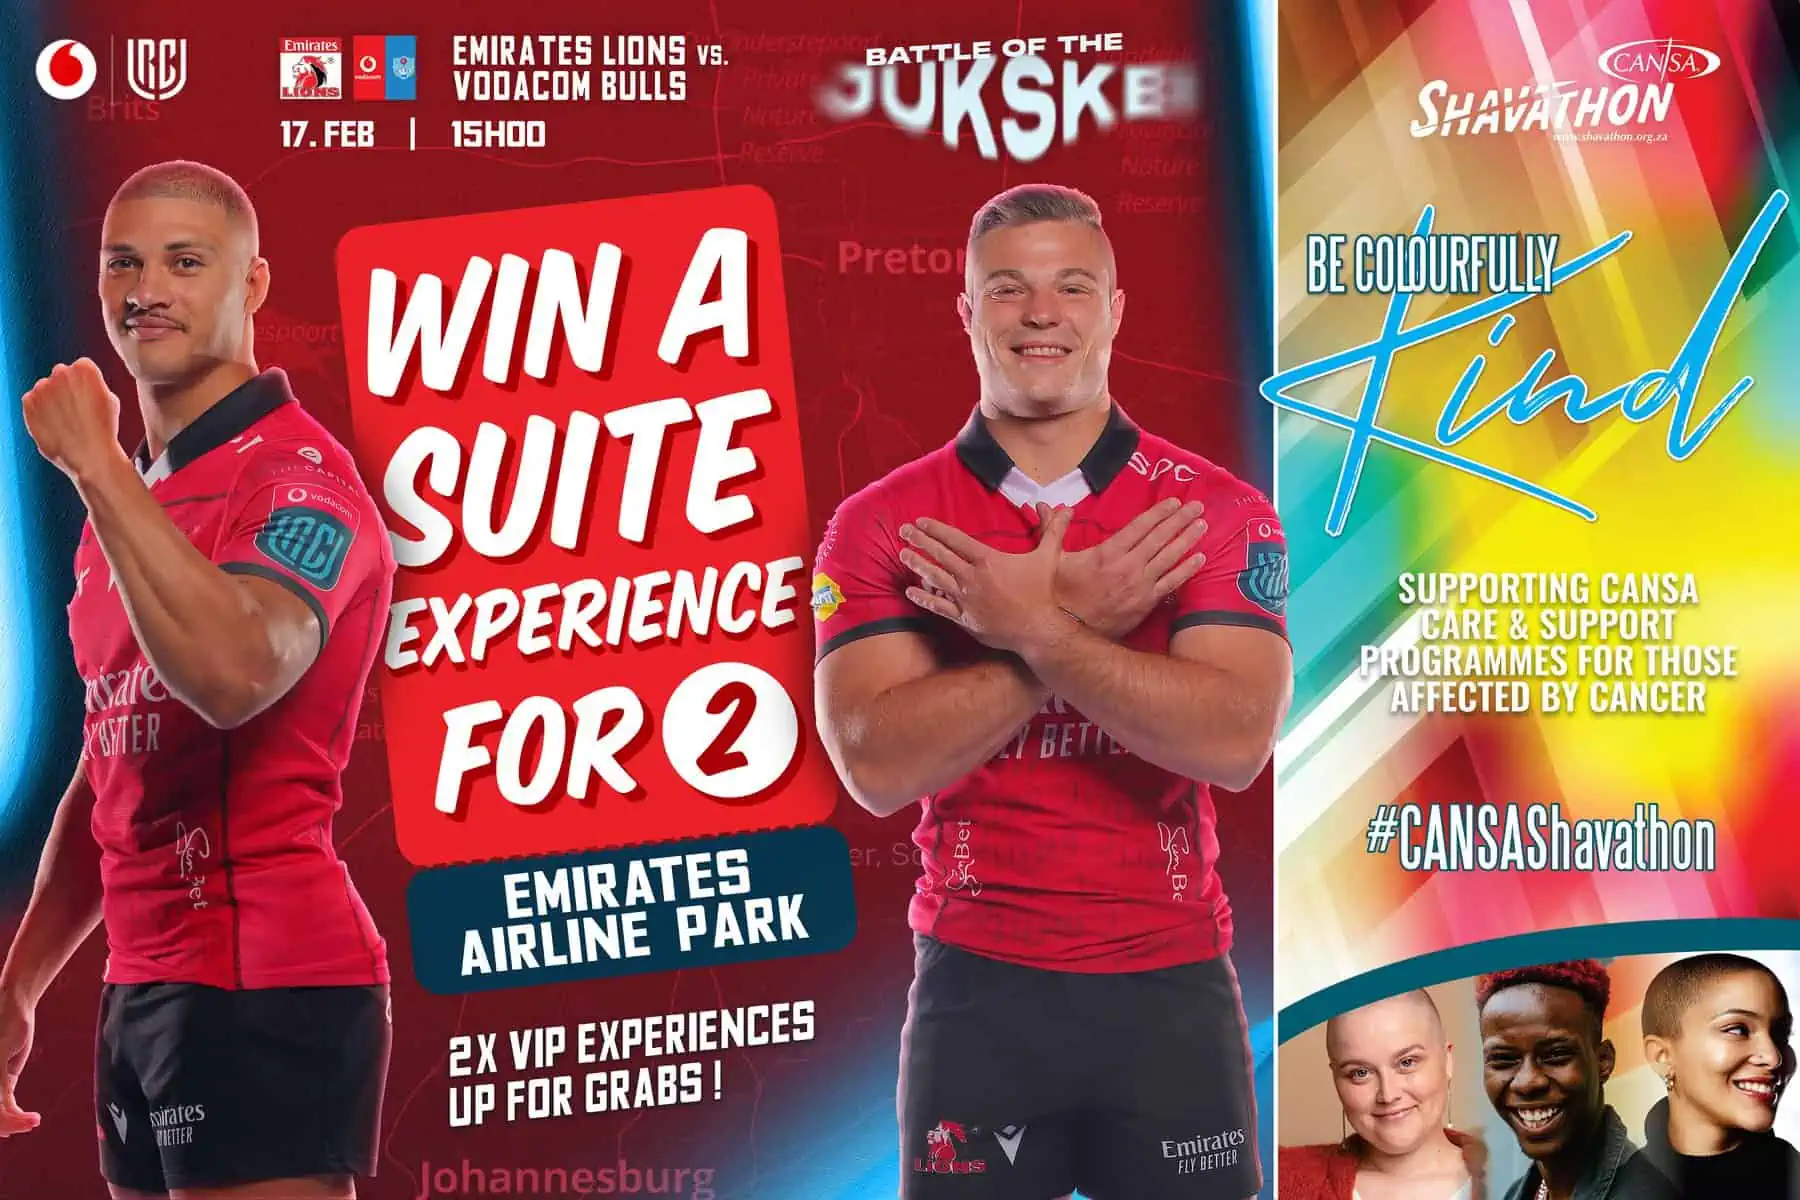 WIN a VIP suite experience with Emirates Airline Park